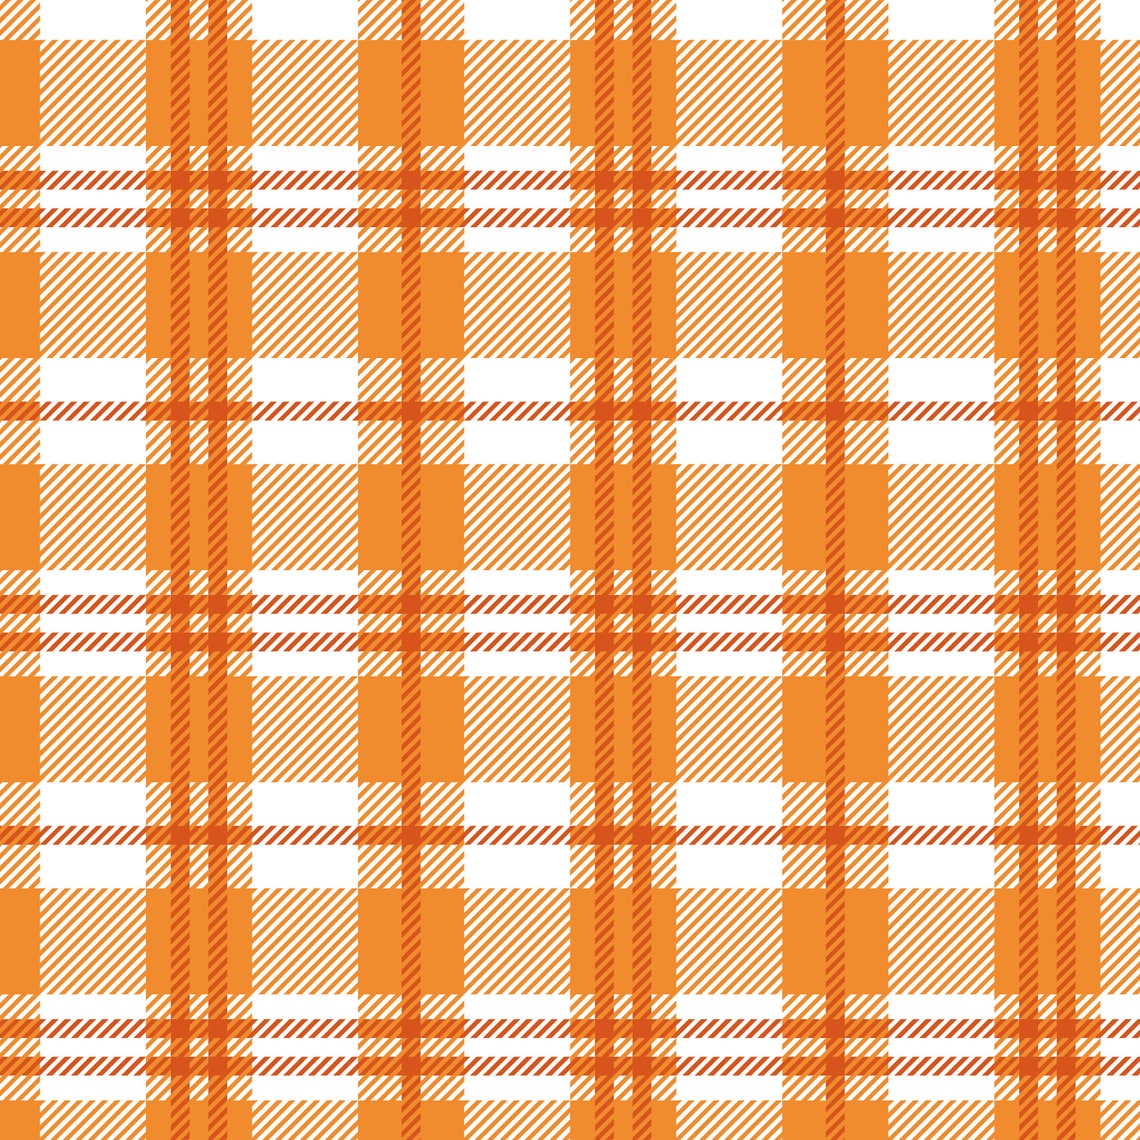 Fall Plaid Fabric by the Yard. Quilt Cotton Organic Knit - Etsy UK